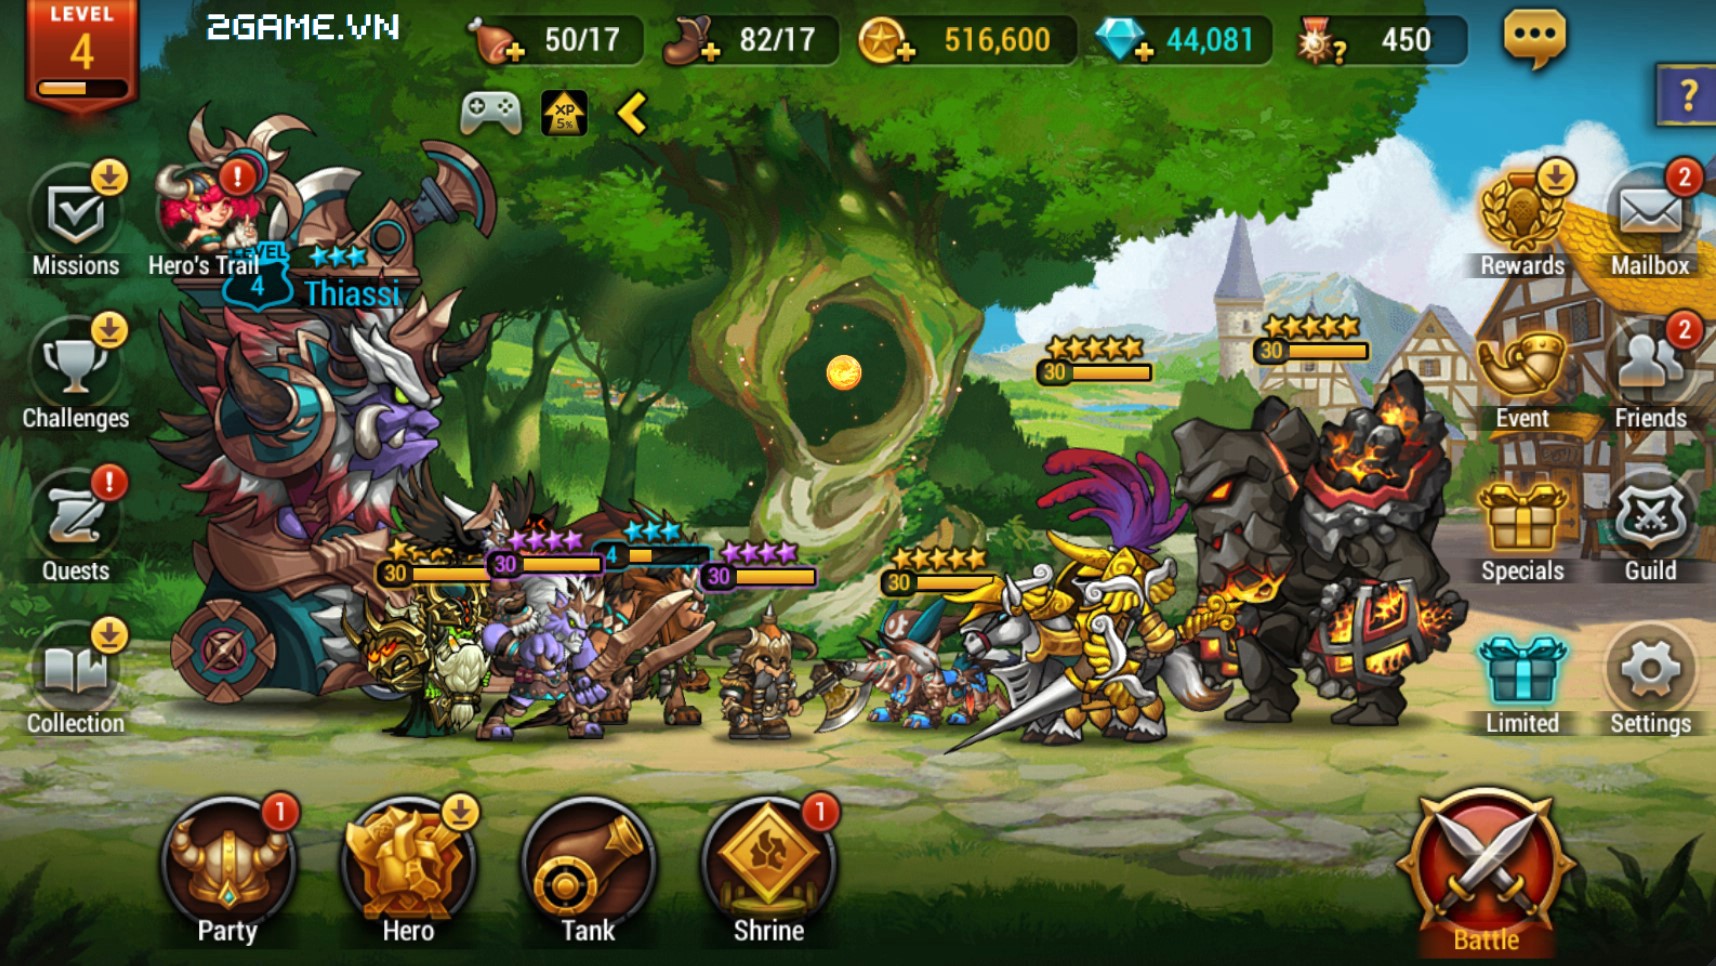 2game-anh-Seven-Guardians-mobile-1.jpg (1716×966)